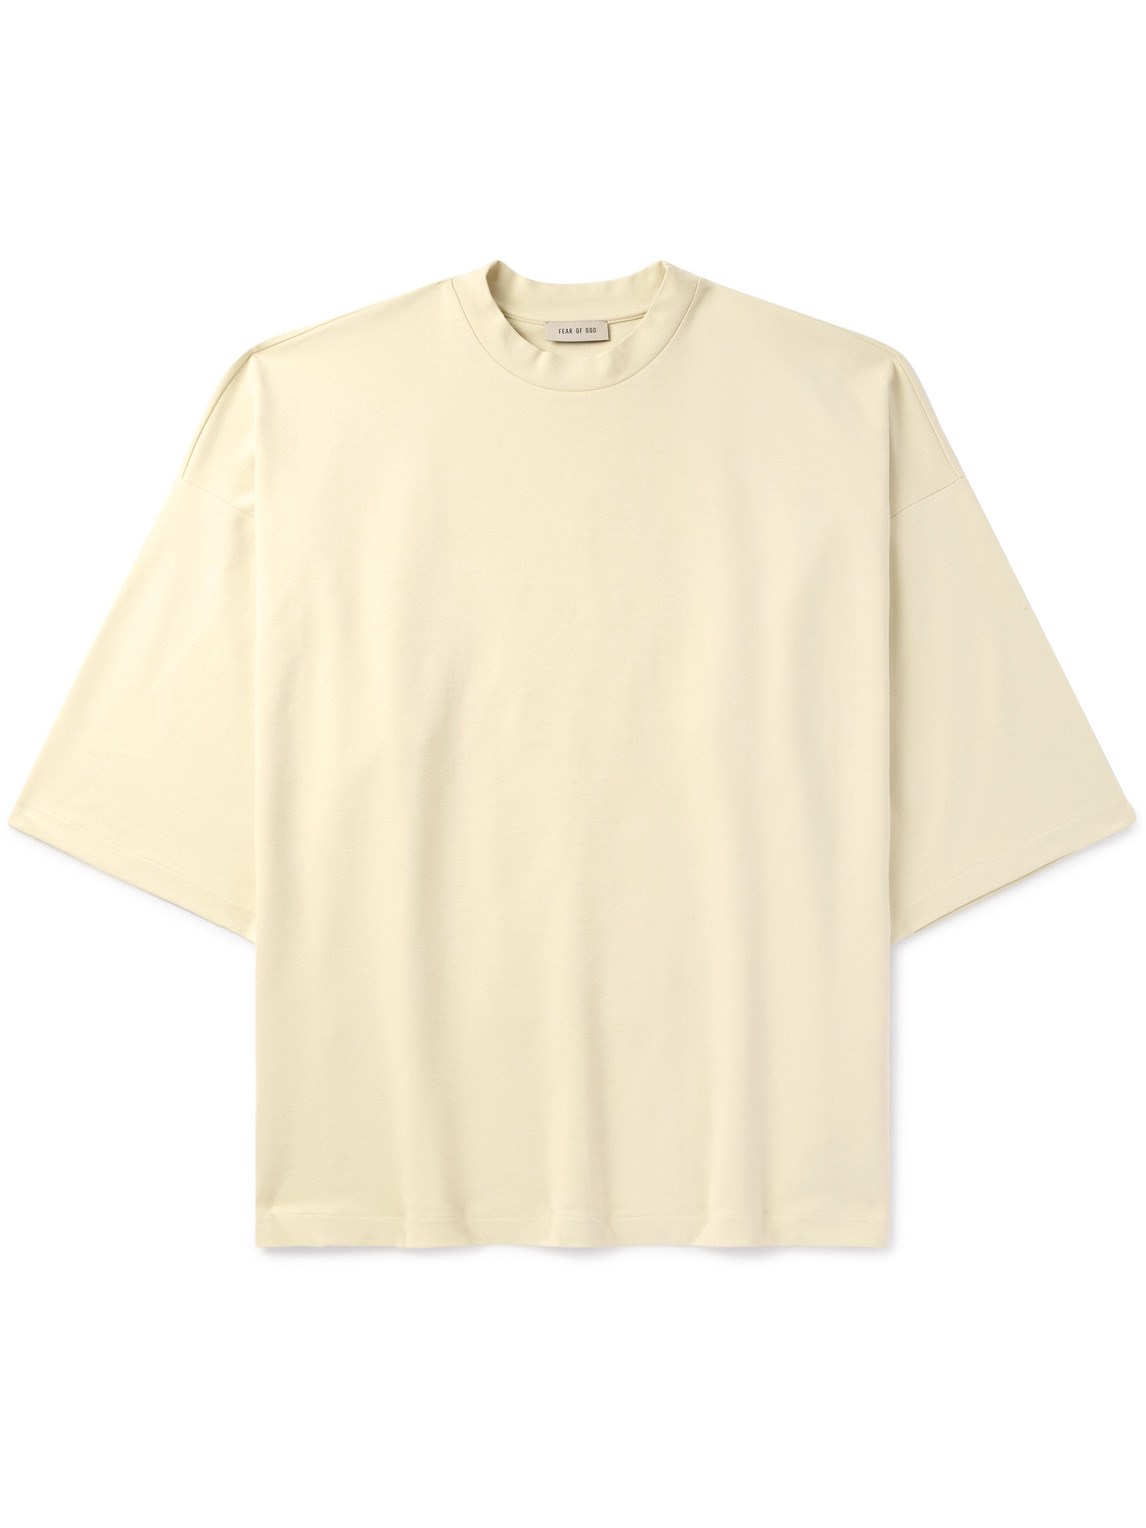 Fear of God - Thunderbird Milano Oversized Embroidered Jersey T-Shirt - Men - Yellow - M von Fear of God